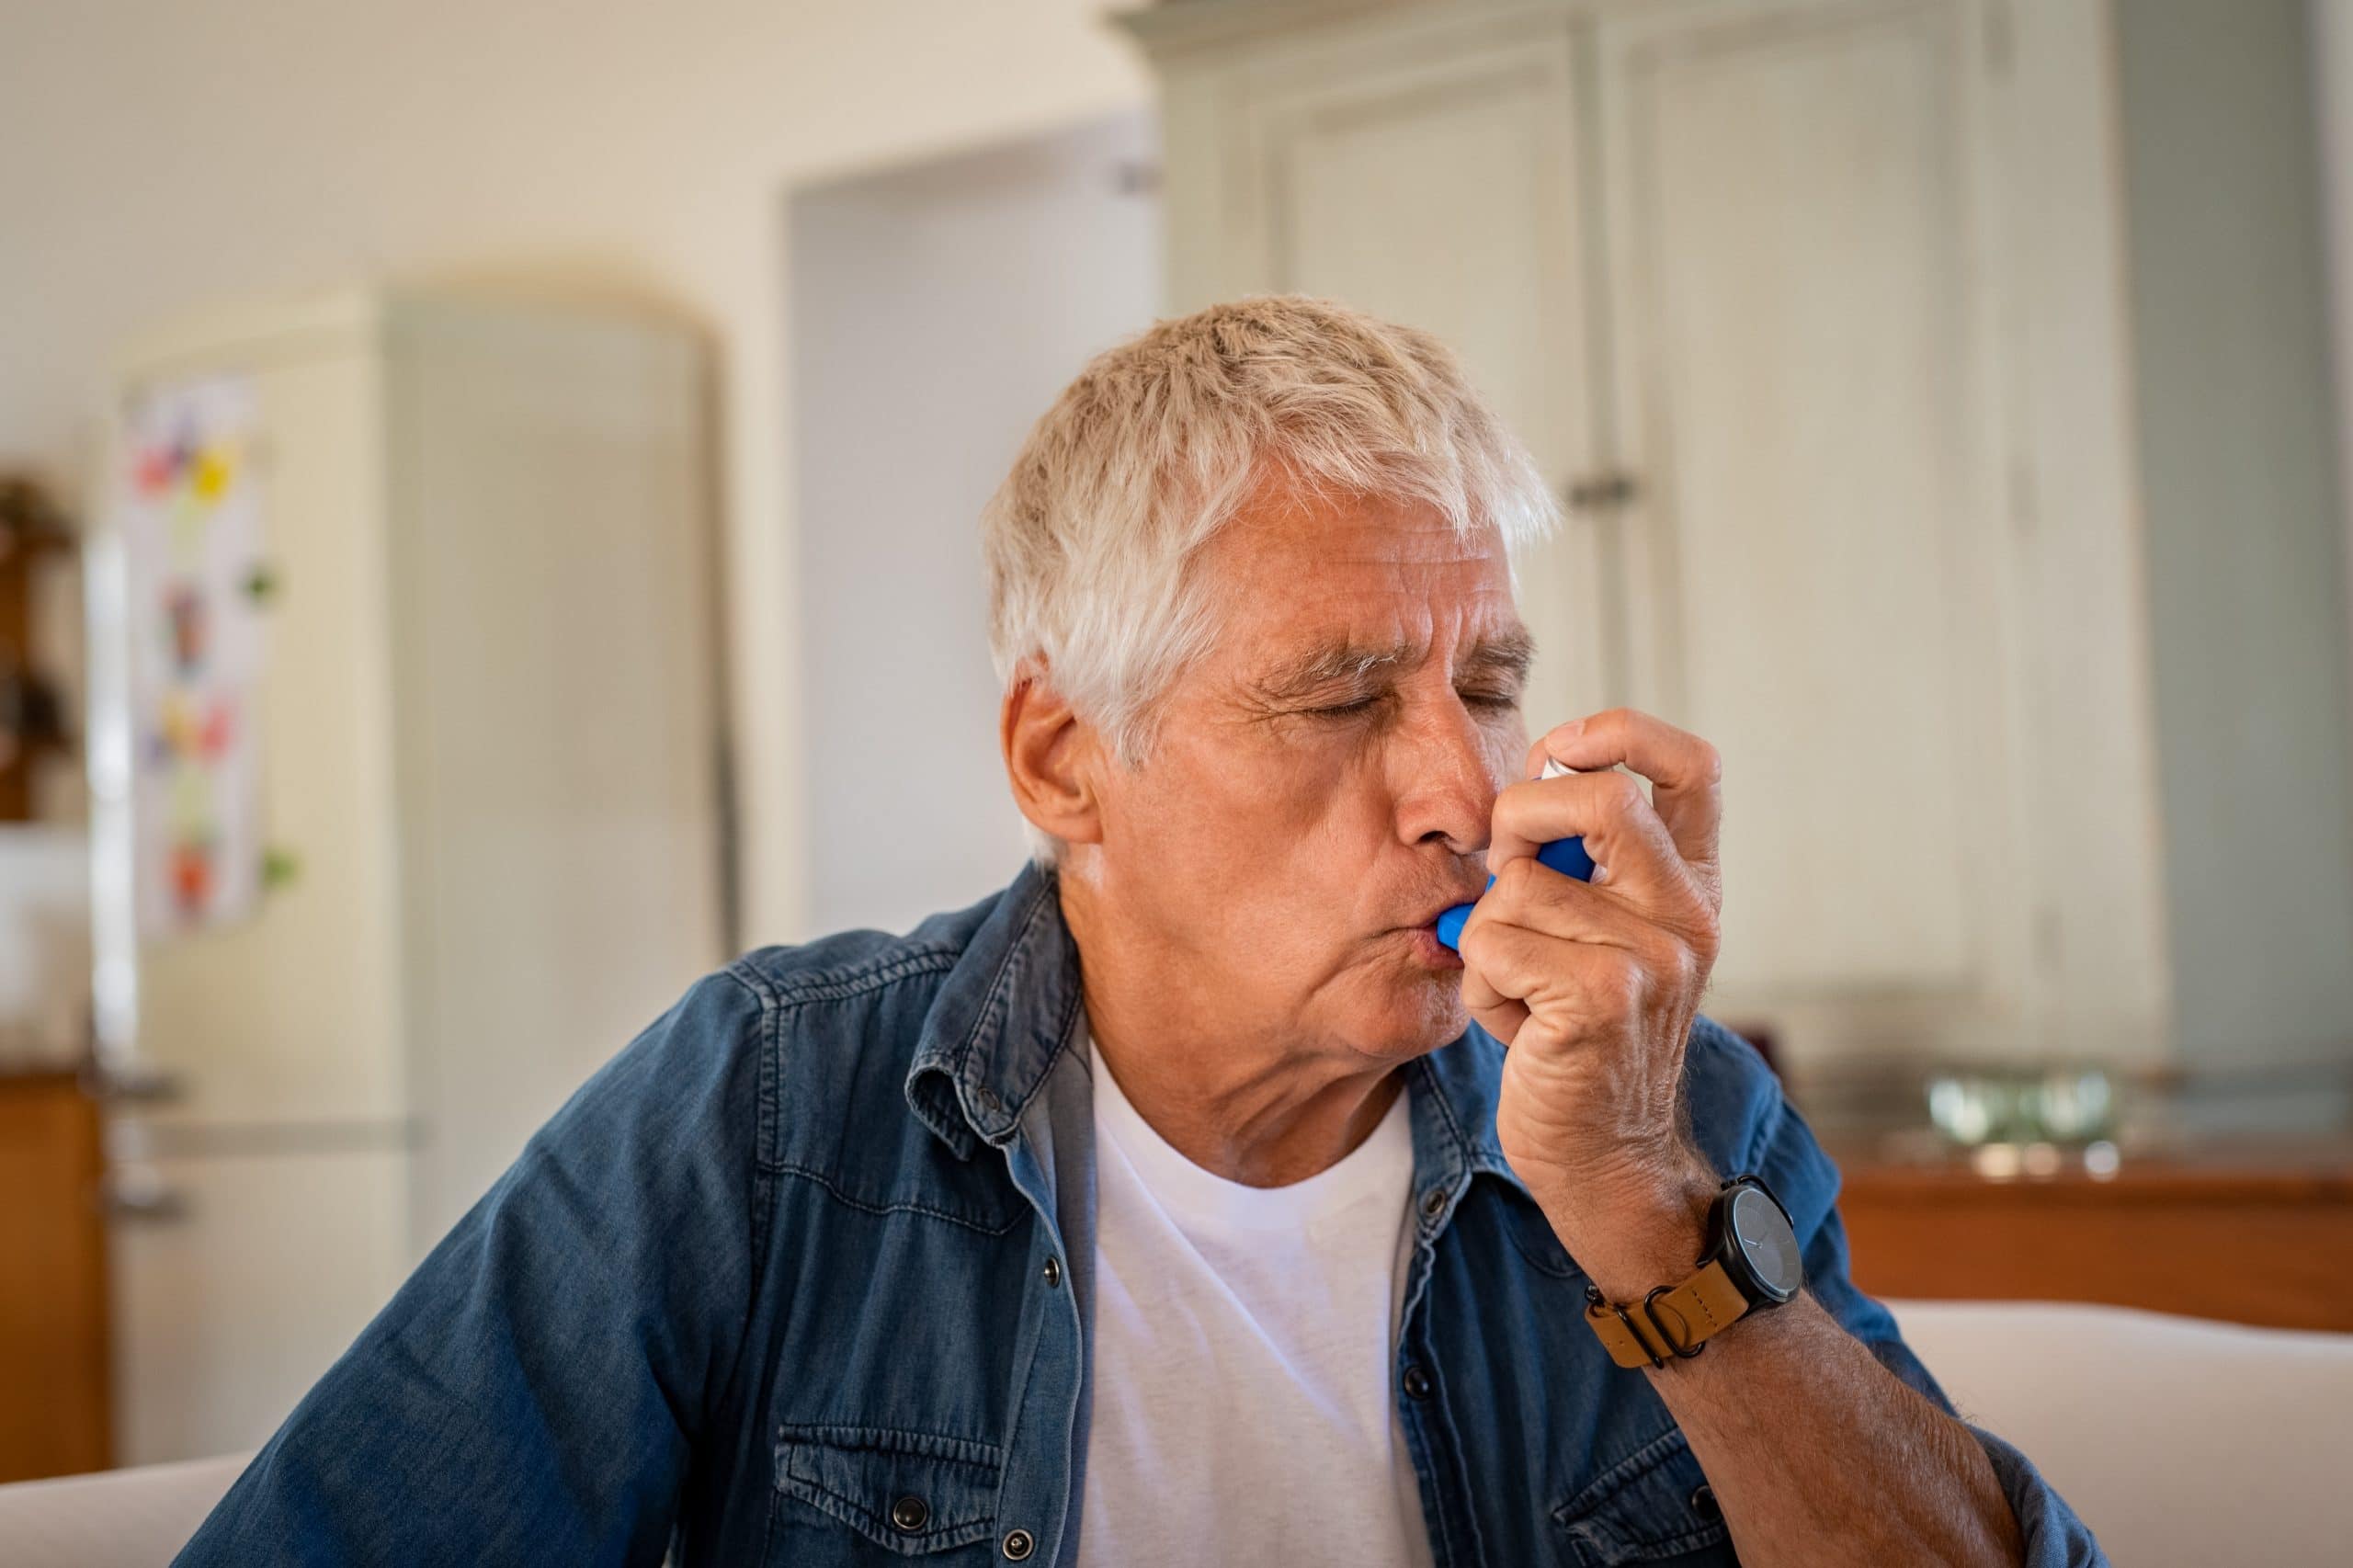 7 Warning signs of Chronic Obstructive Pulmonary Disease (COPD)